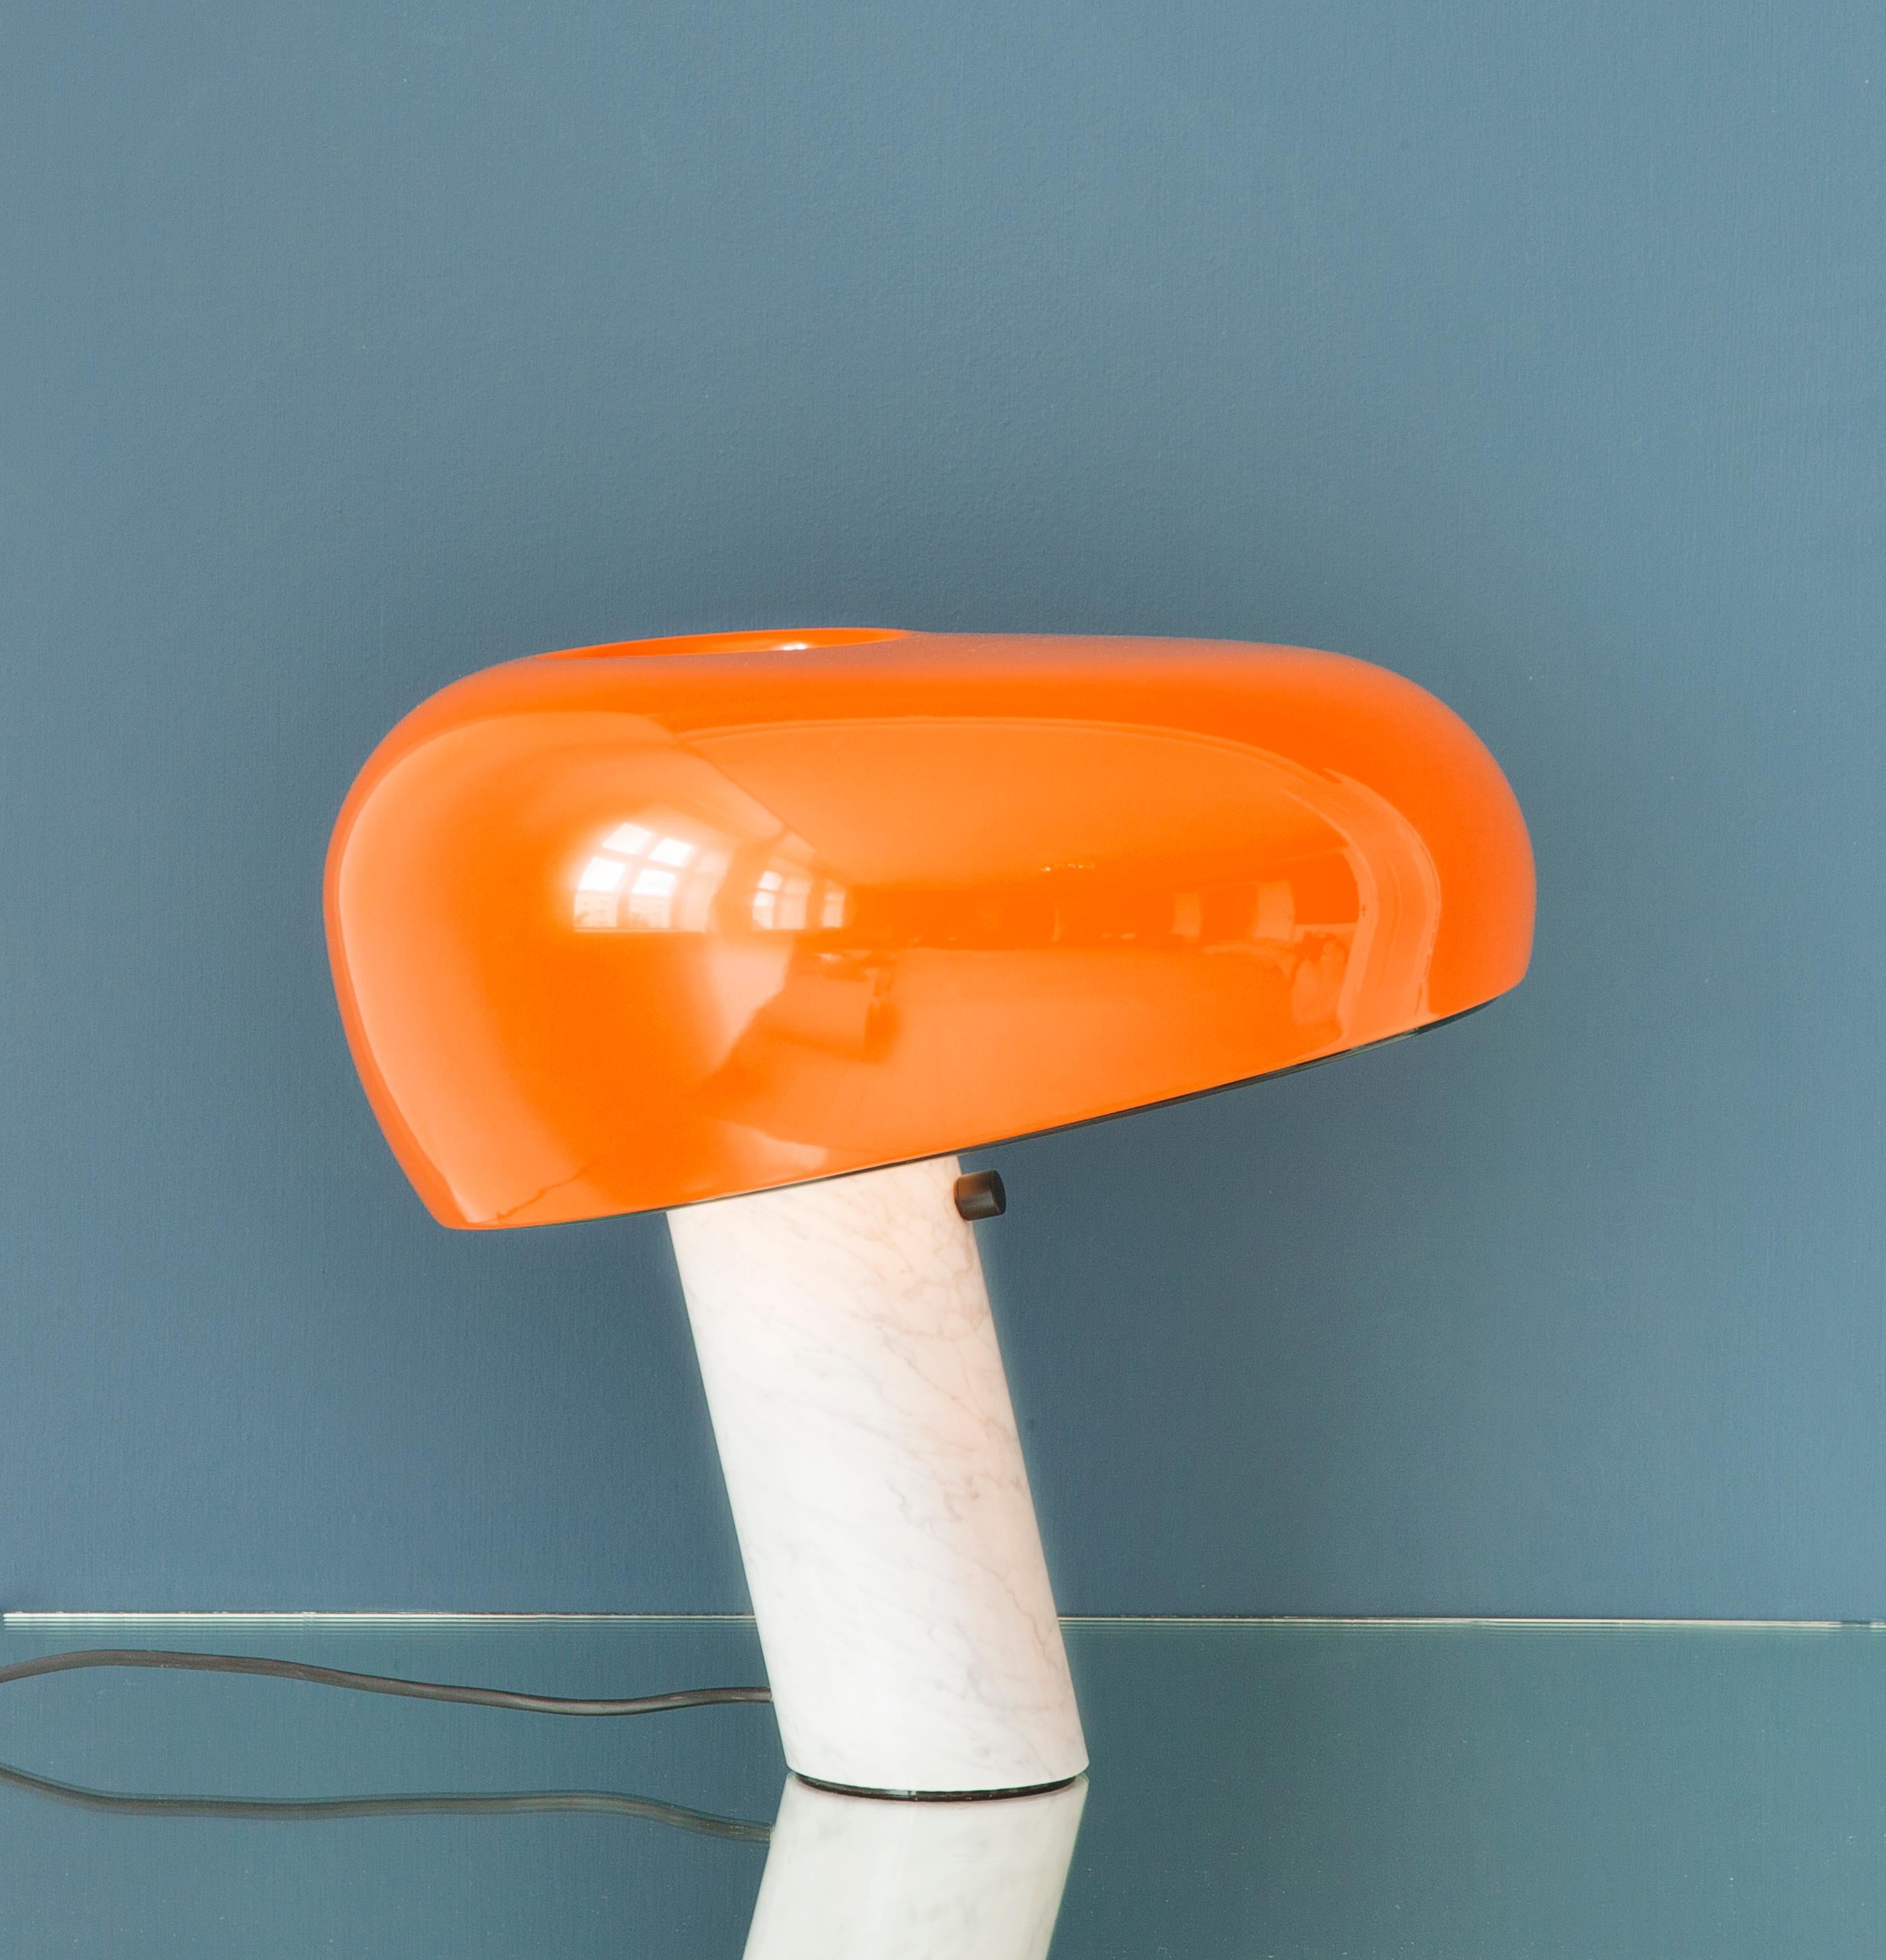 Contemporary Italian Snoopy table lamp from Flos with white marble base and orange lacquered metal shade. Special re-edition made for The Apartment in 2015.

The Italian architect and designer brothers Achille Castiglioni (1918-2002) and Pier